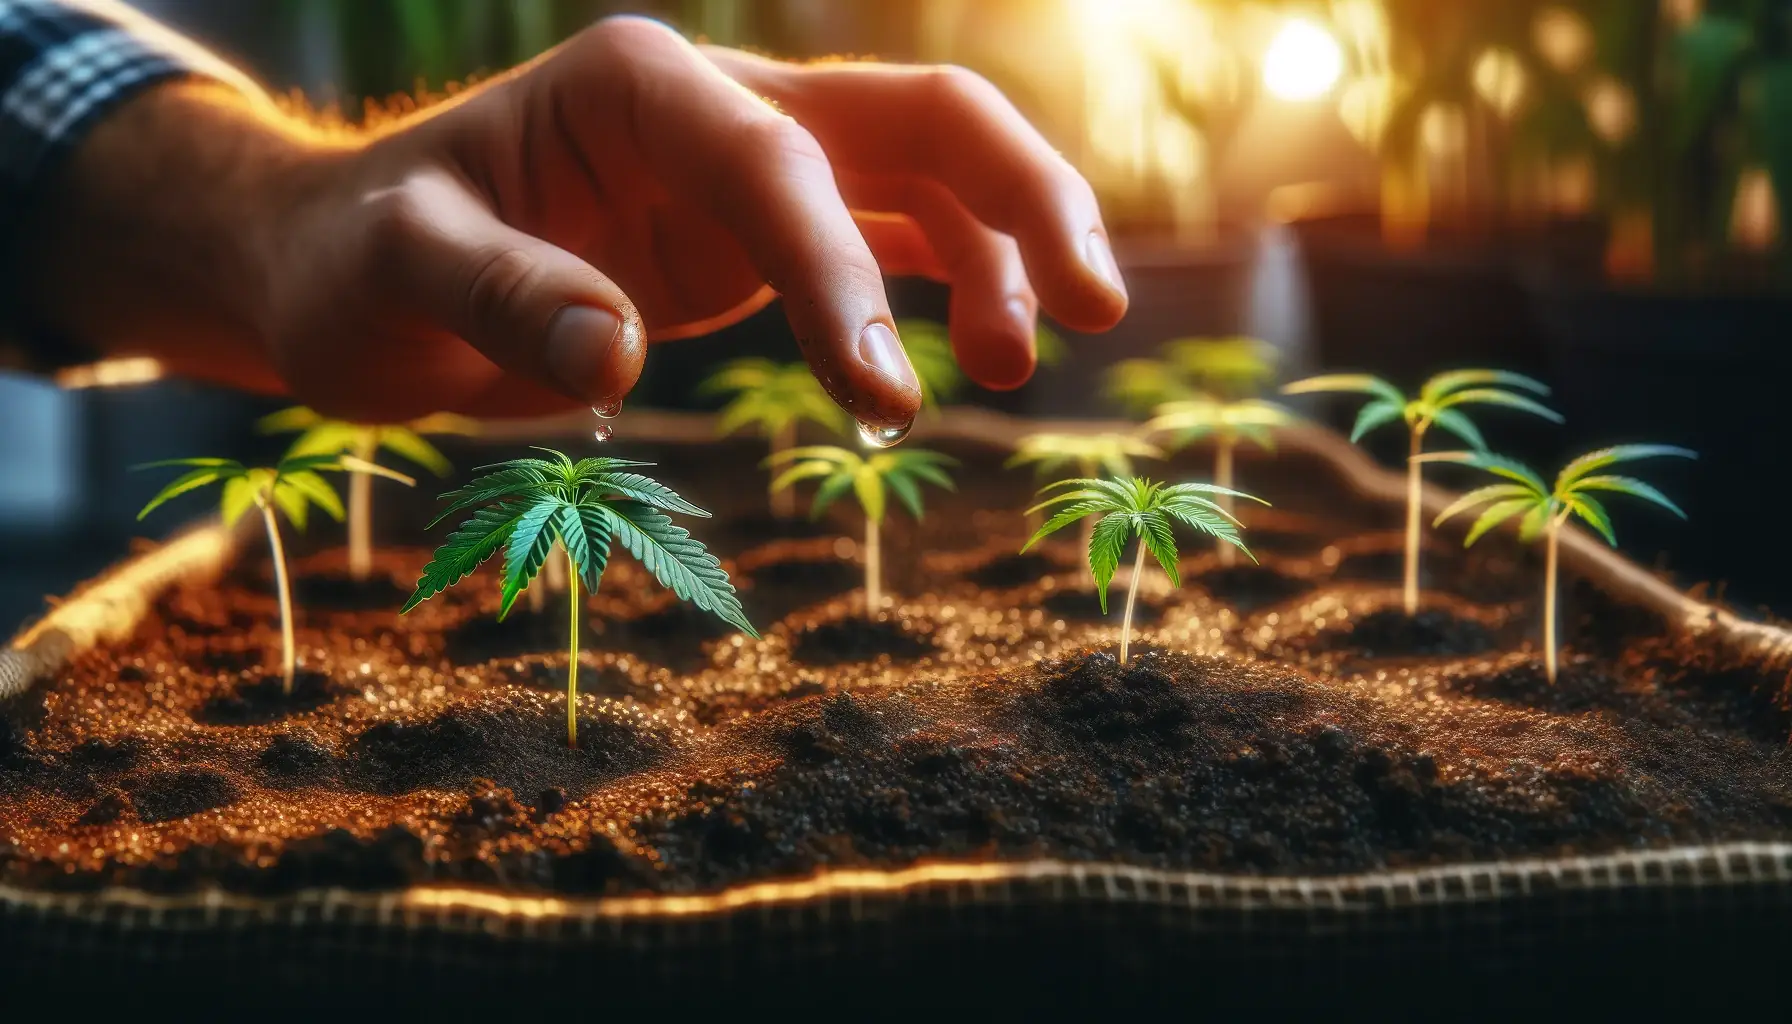 The proper way to water cannabis seedlings